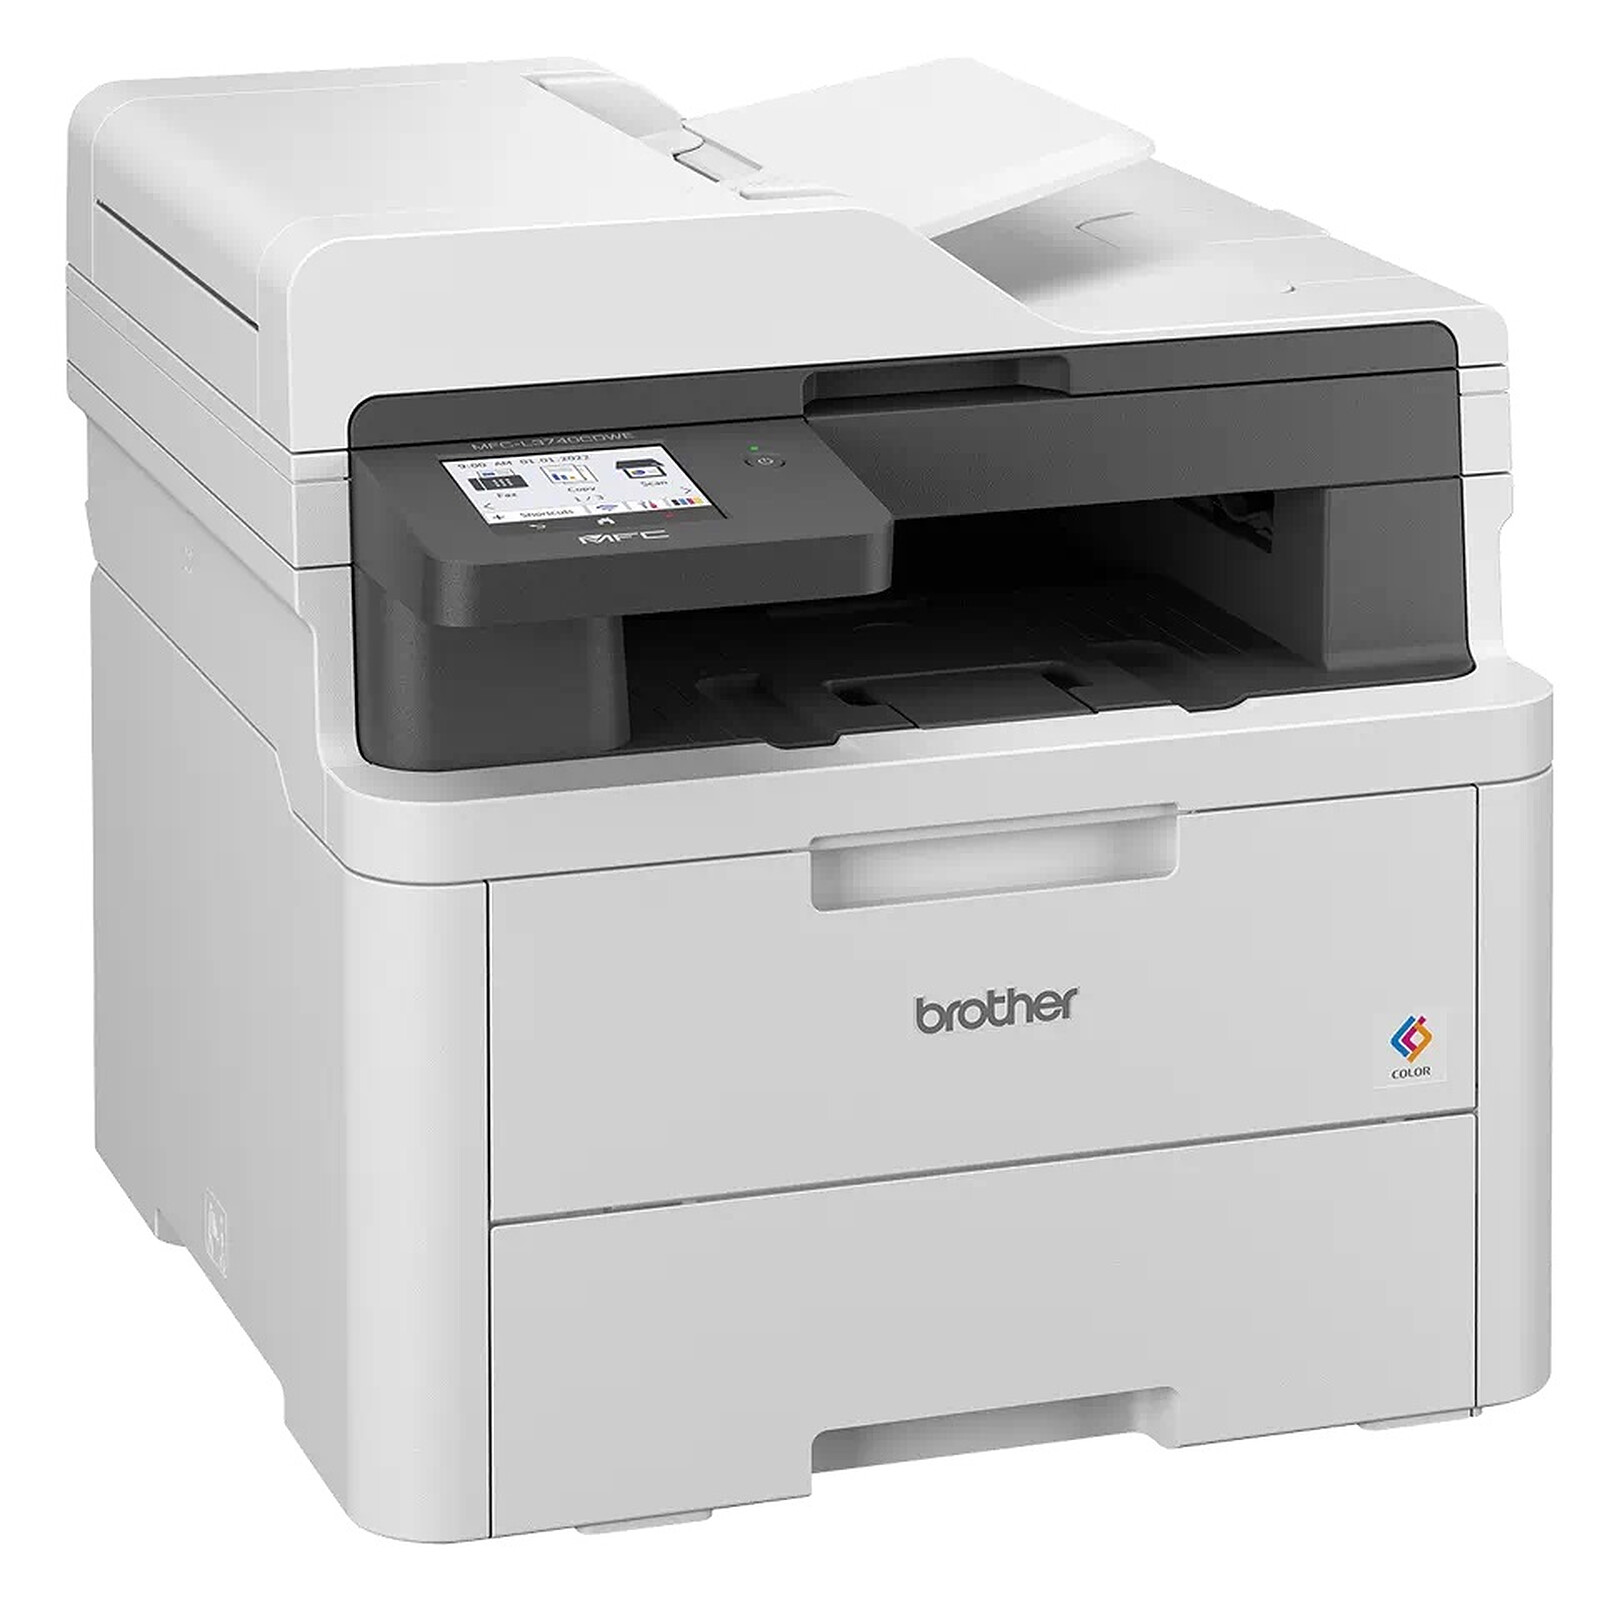 Brother MFC-L3740CDWE - All-in-one printer - LDLC 3-year warranty